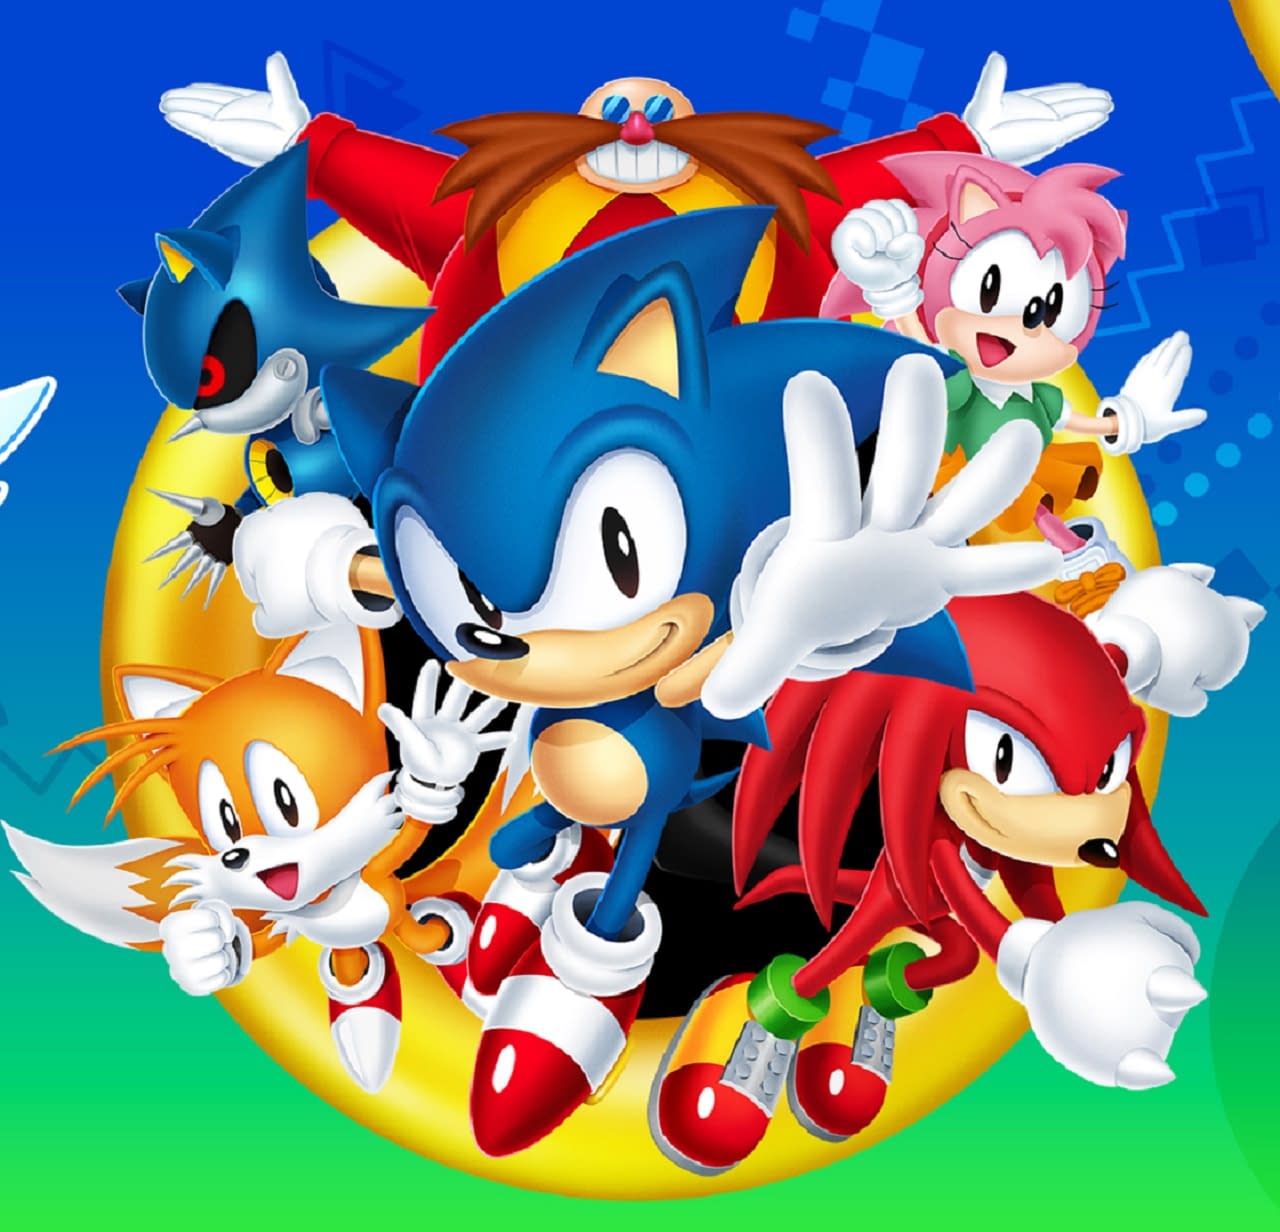 Sonic Classic Heroes - Play Sonic Classic Heroes On New Trending